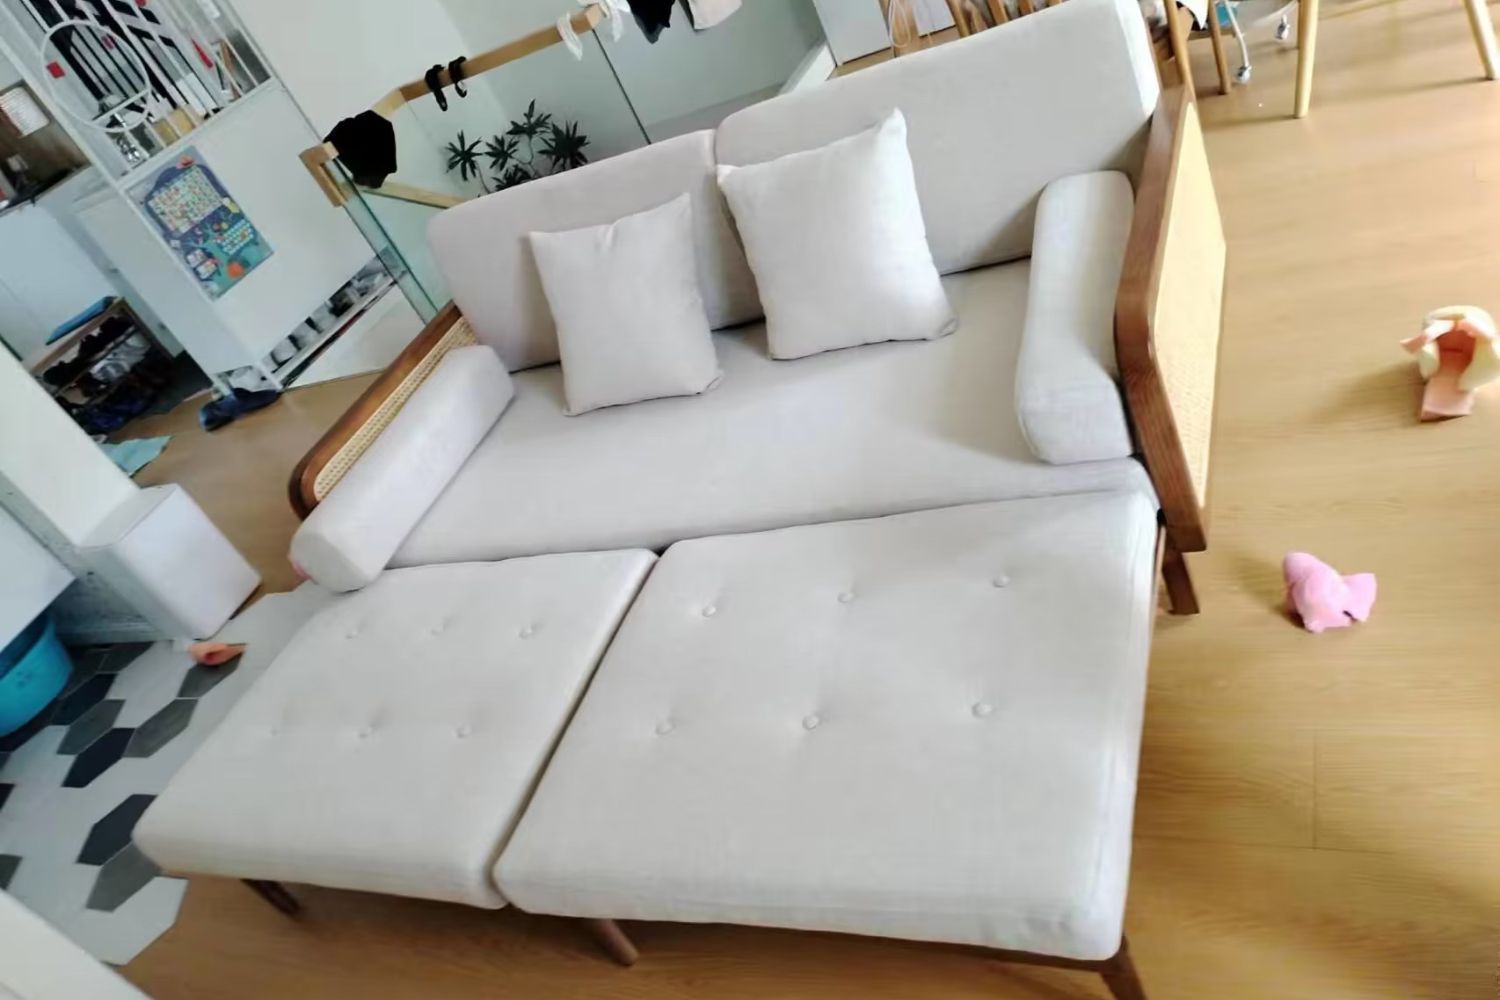 Cane fabric sofa bed in real customer's home